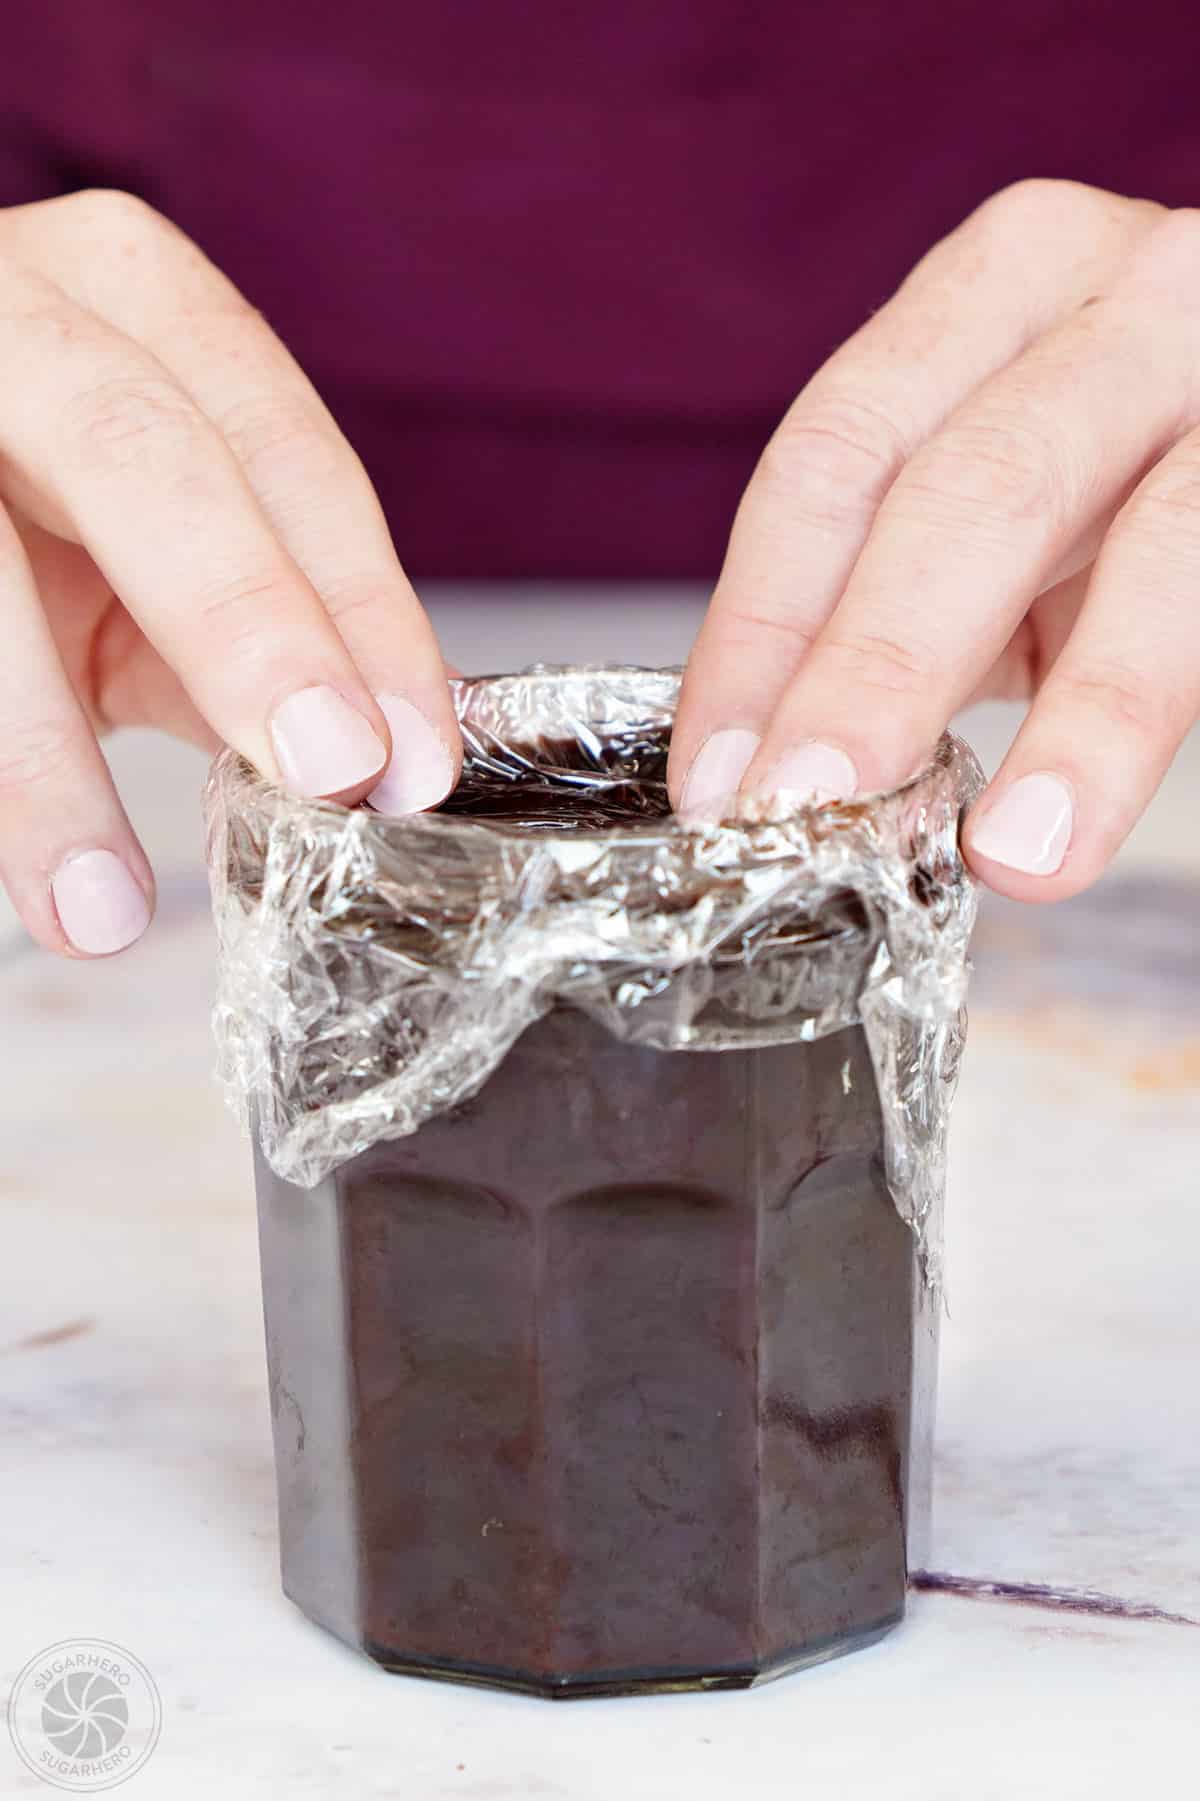 Hands pressing plastic wrap on the top of a jar of chocolate spread.